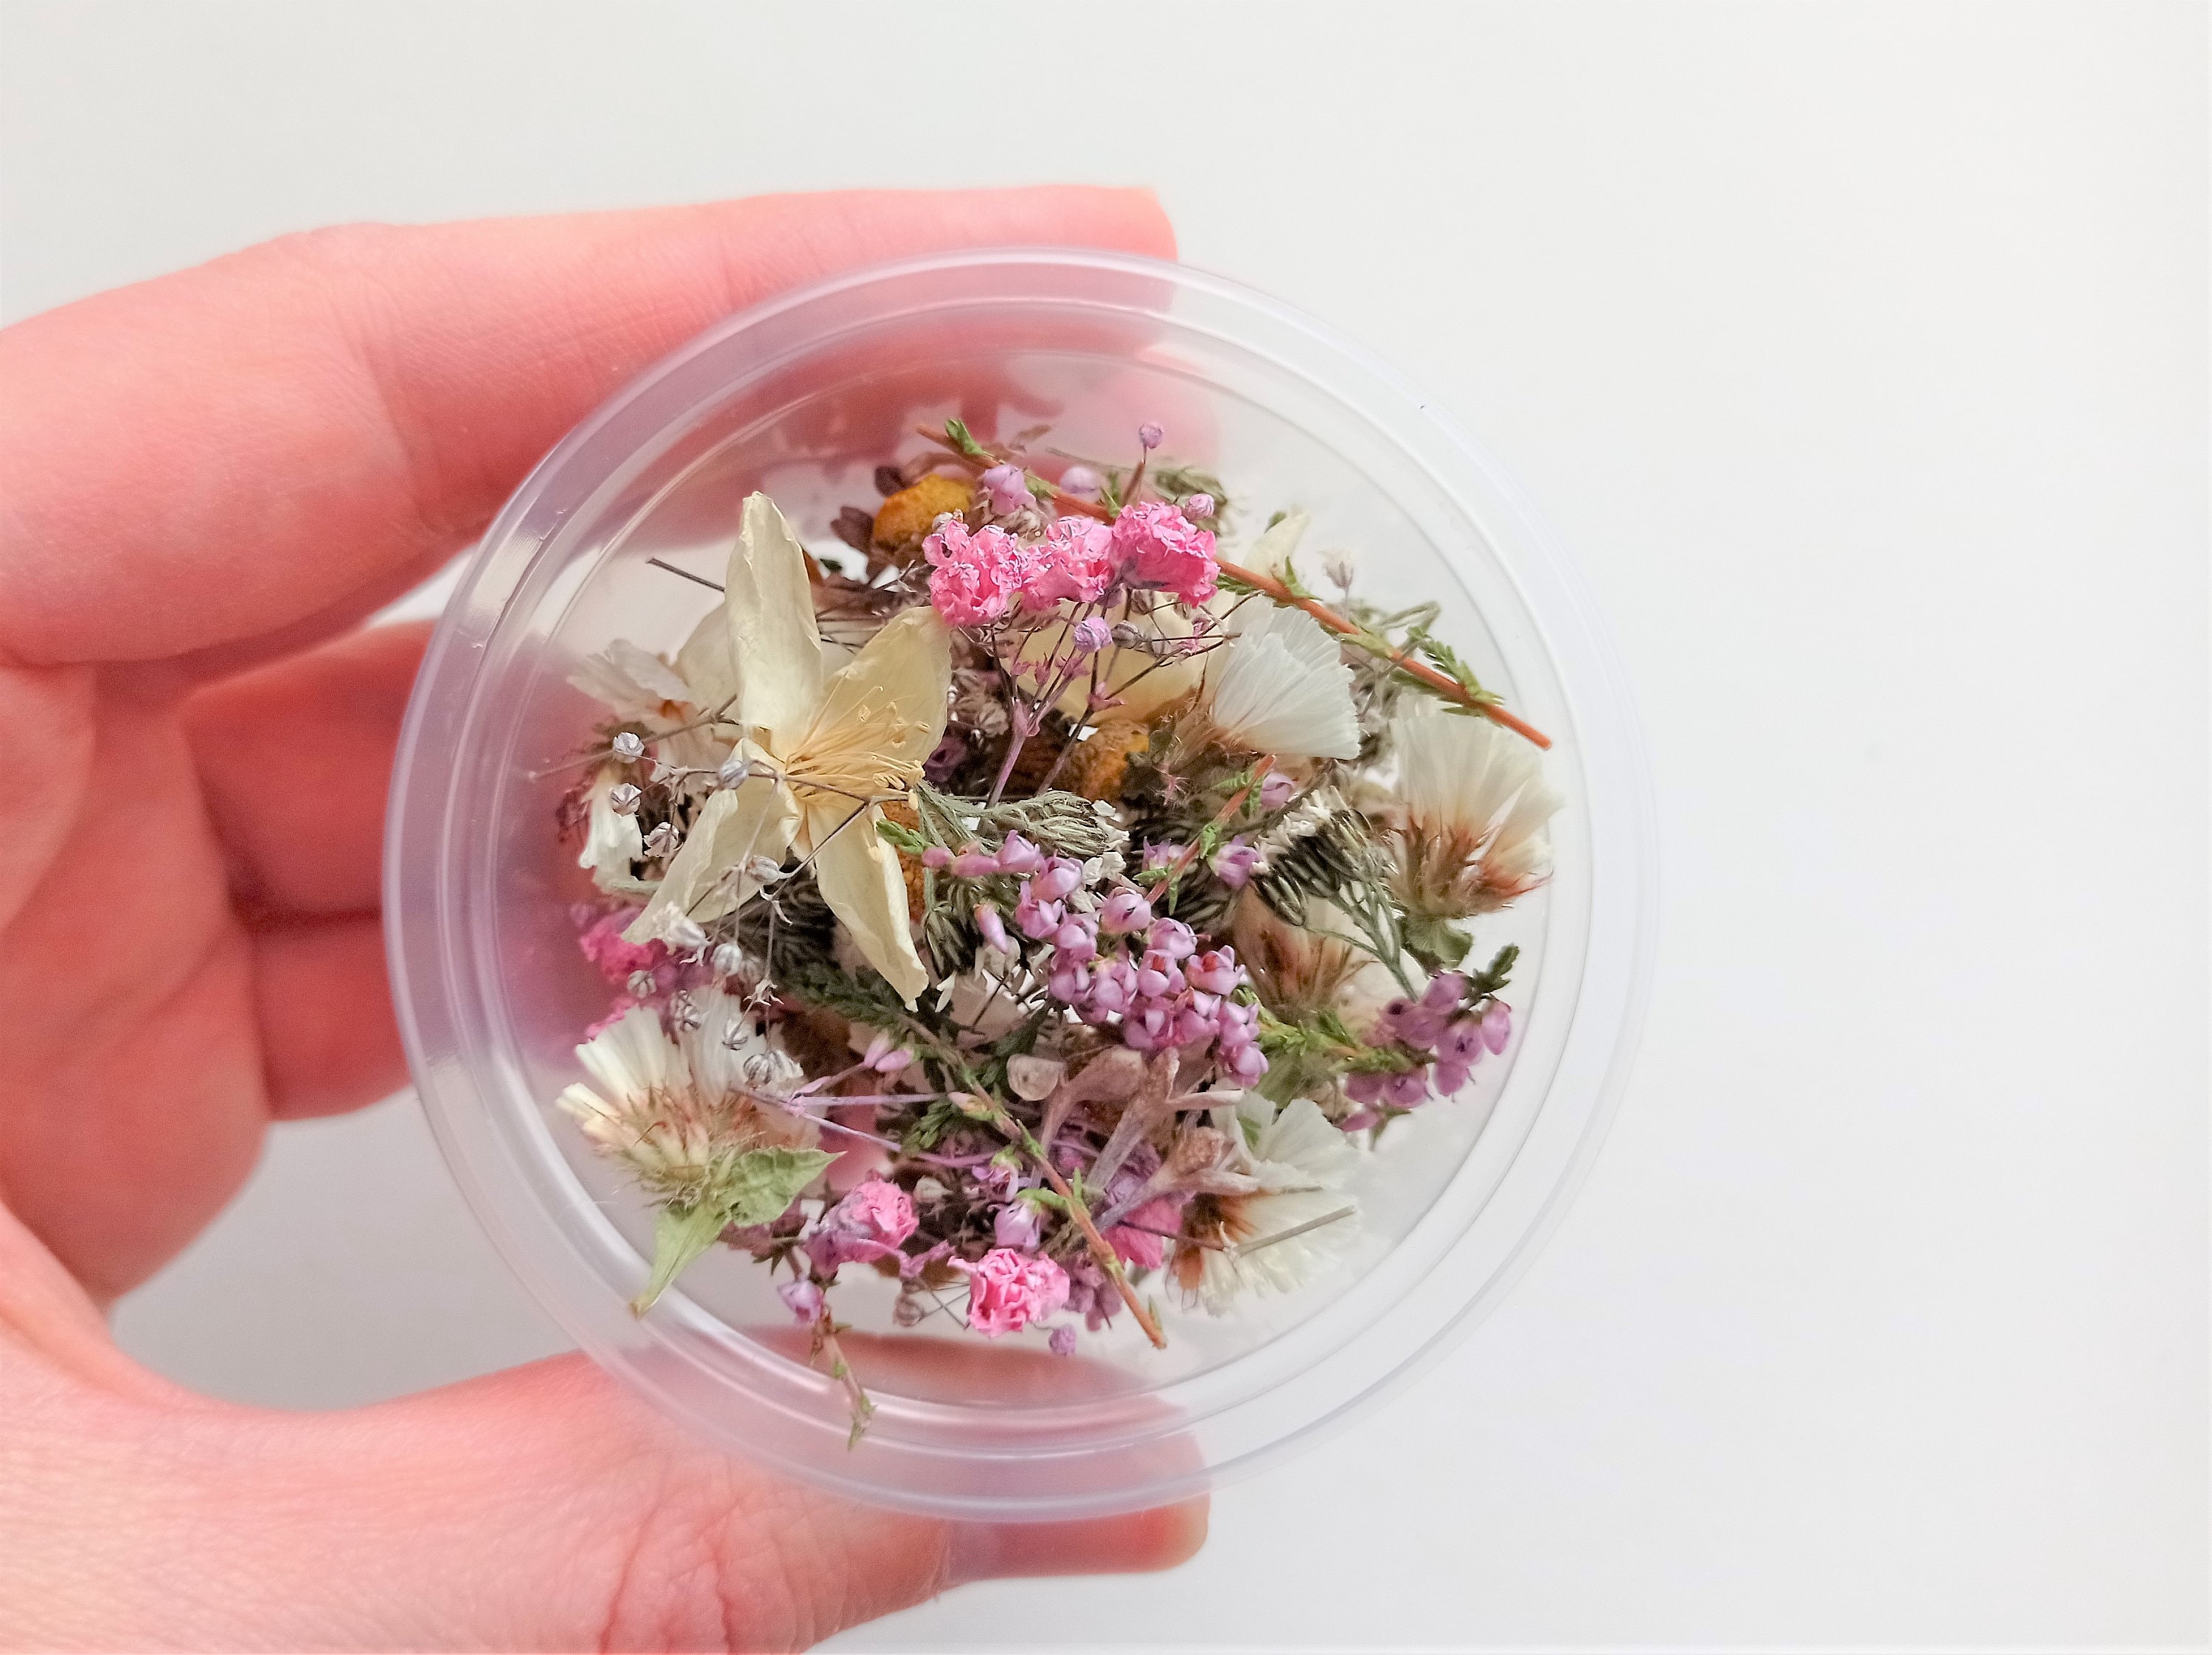 How to Make a Resin Mug with Dried Flowers┃Safe to drink? 